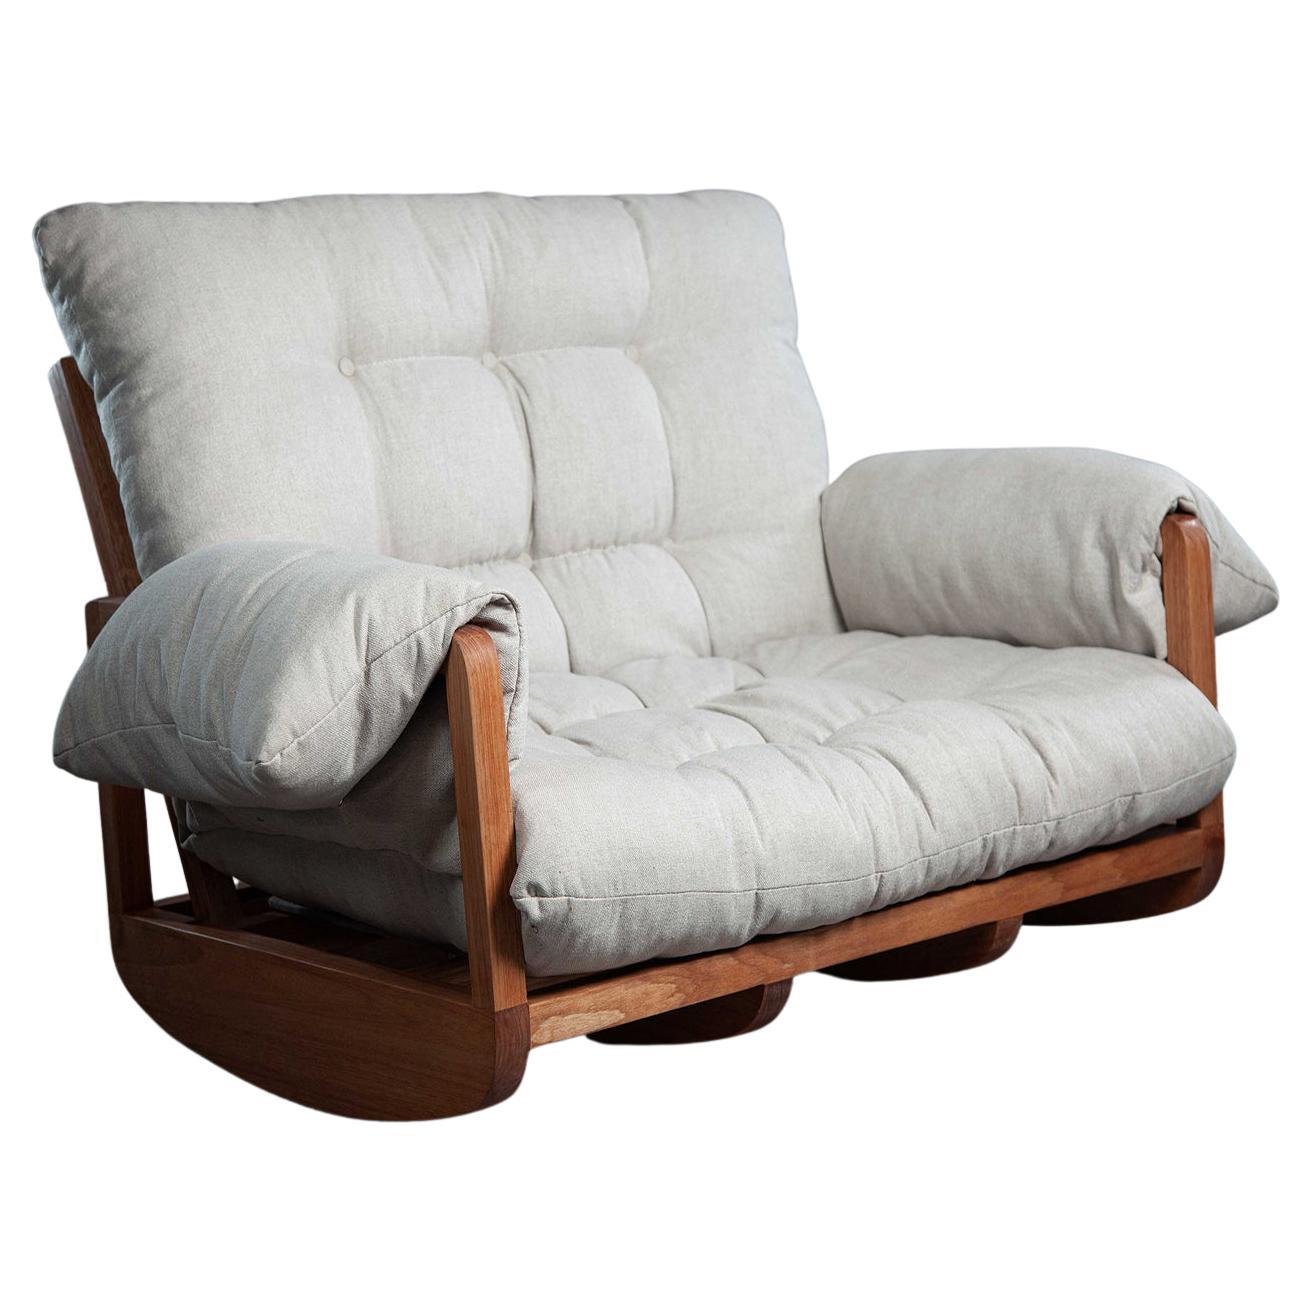 The Laziness Armchair. Rocking sofa in solid wood, upholstered in linen.